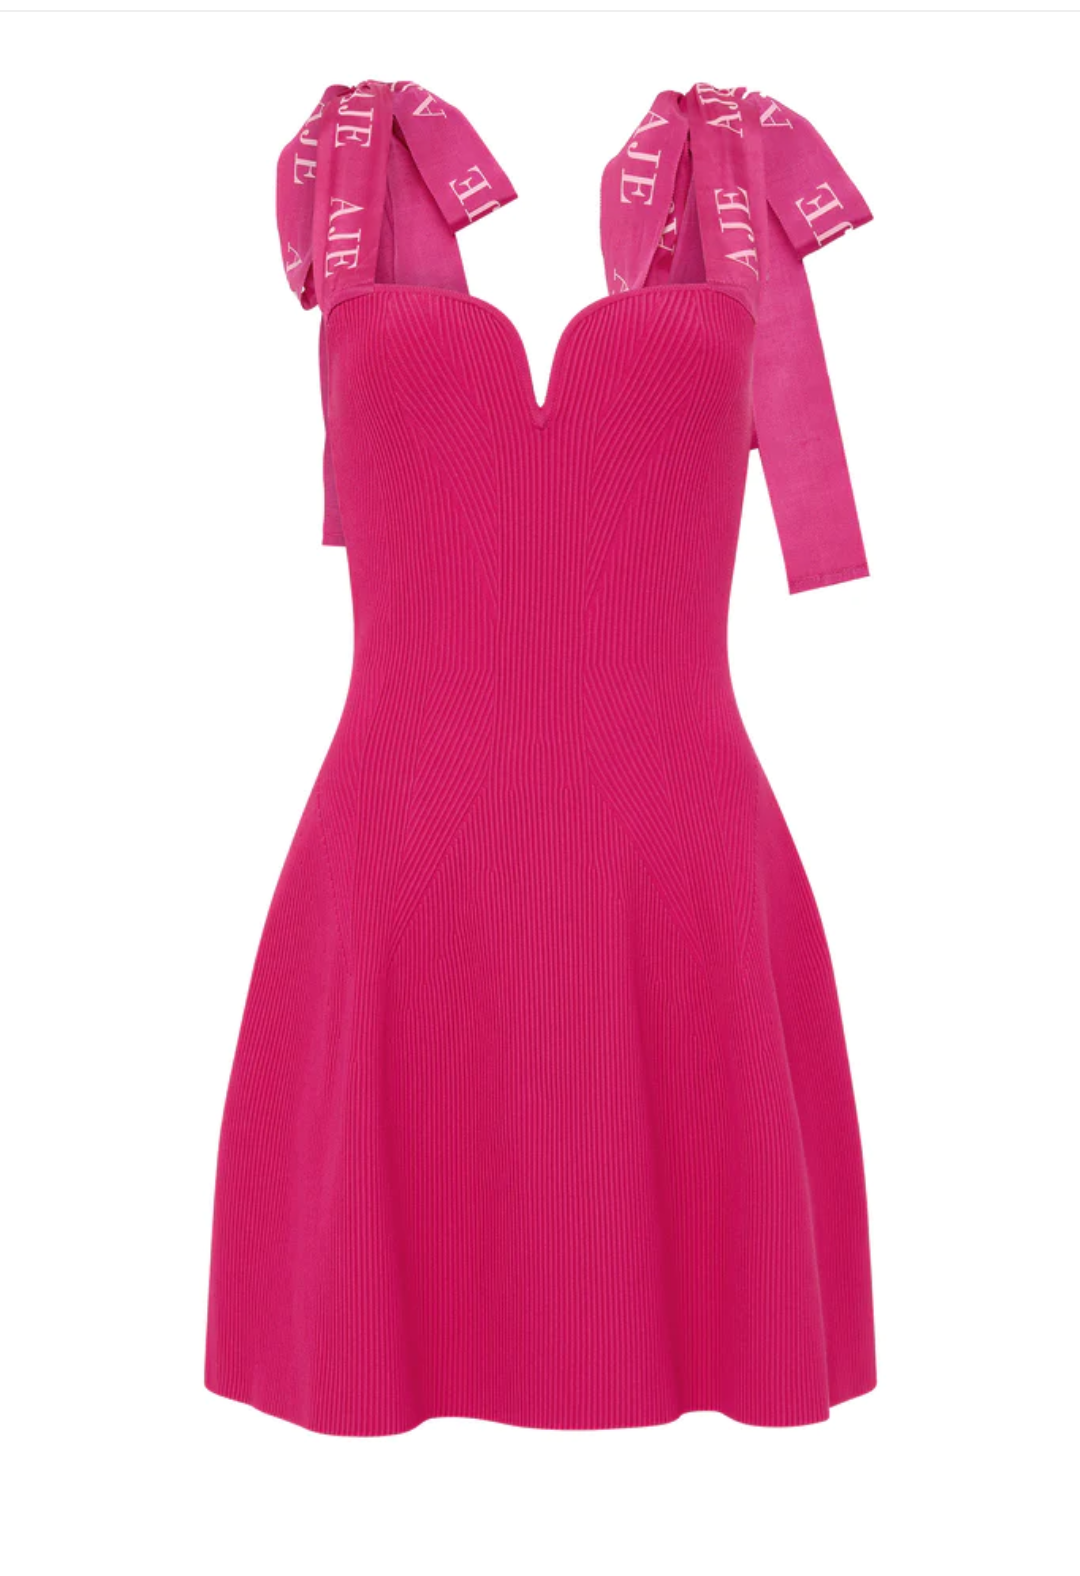 Aje Amber Knit Mini Dress in hot pink for rent.